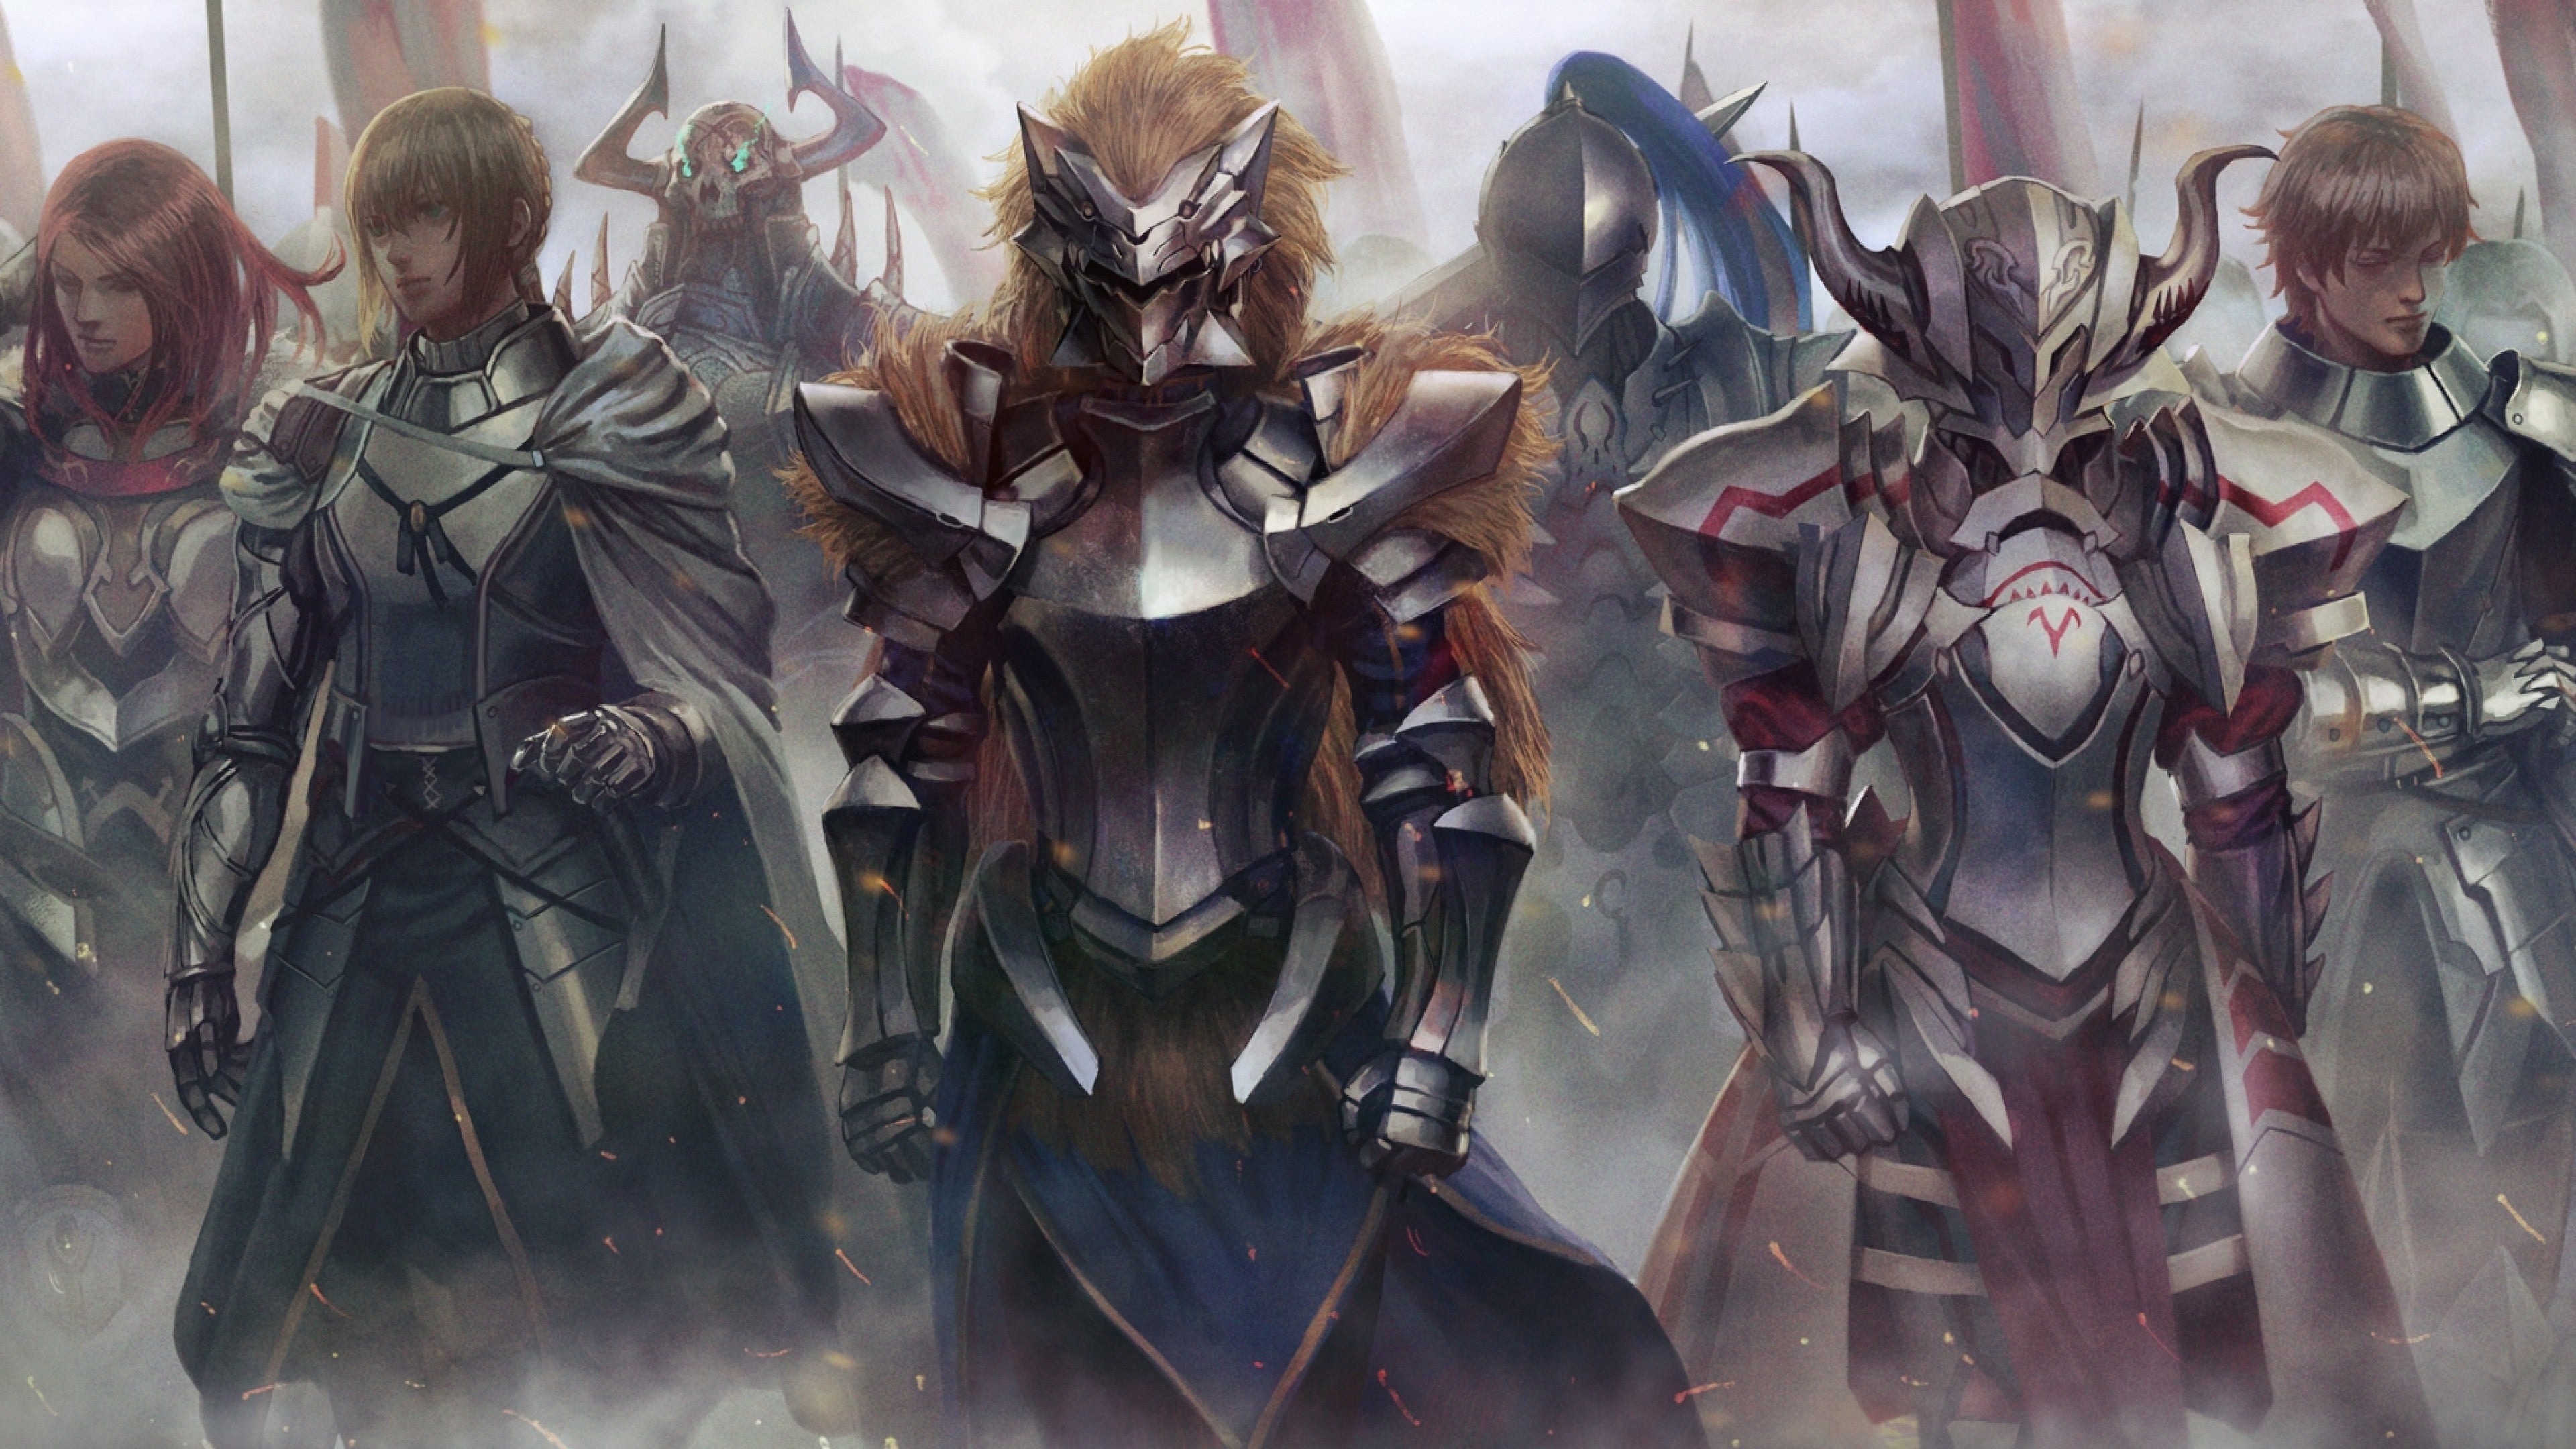 Anime 3840x2160 Fate series armor helmet knight Mordred (Fate/Apocrypha) Lancelot (Fate/Grand Order) Artoria Pendragon (Lancer) Artoria Pendragon Bedivere (Fate/Grand Order) Berserker (Fate/Zero) Gawain (Fate/Grand Order) King Hassan (Fate/Grand Order) Tristan(fate/Grand Order) Fate/Zero Fate/Extra Fate/Apocrypha  Fate/Grand Order